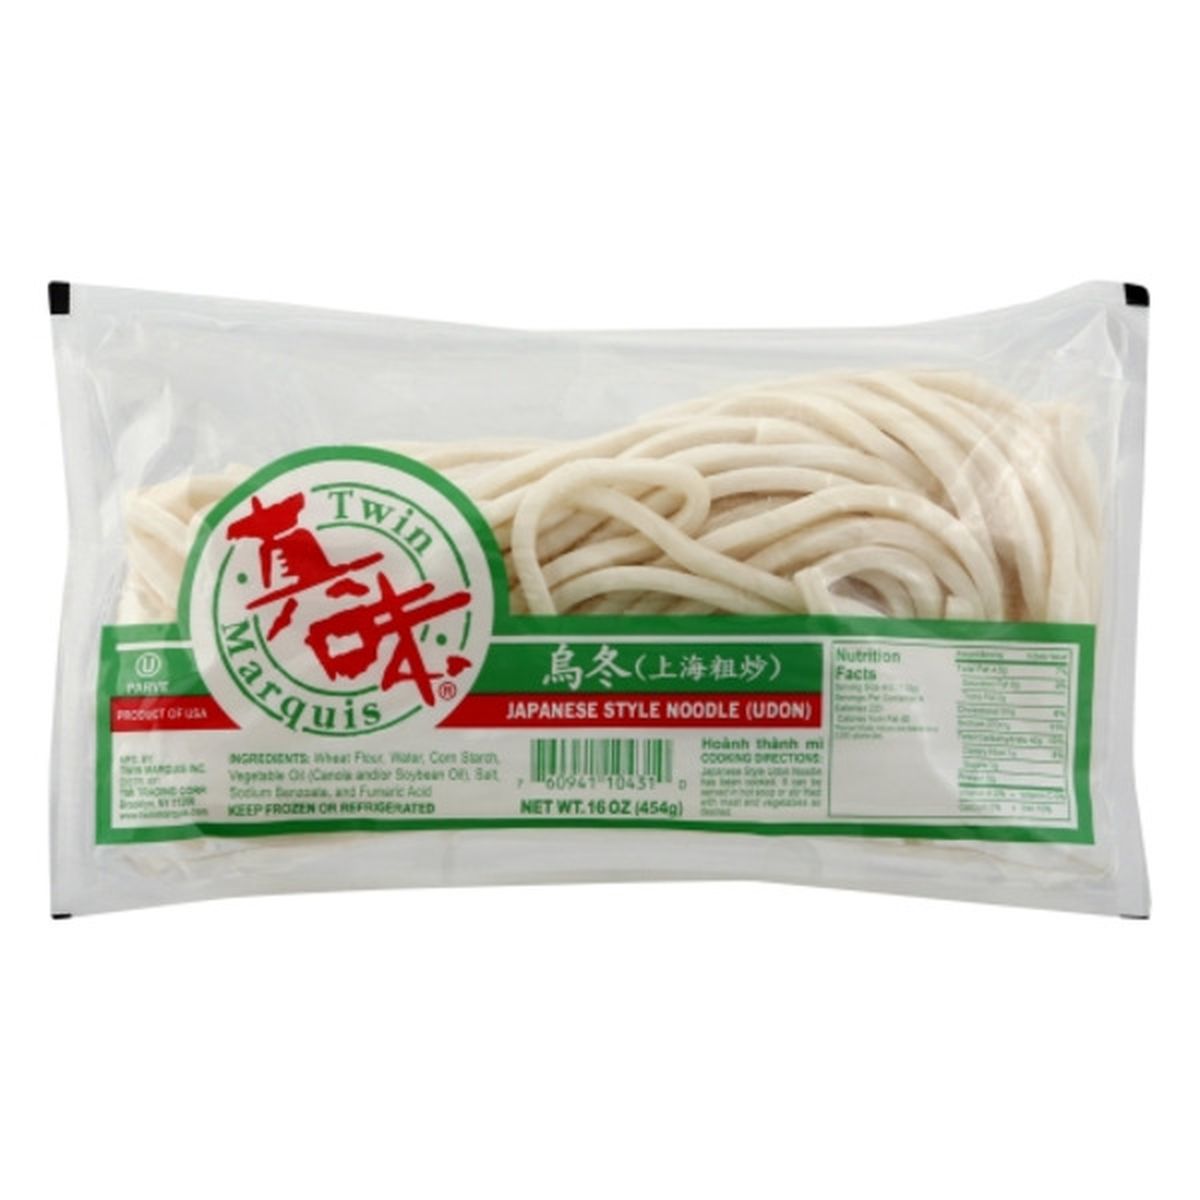 Calories in Twin Marquis Noodle, Udon, Japanese Style